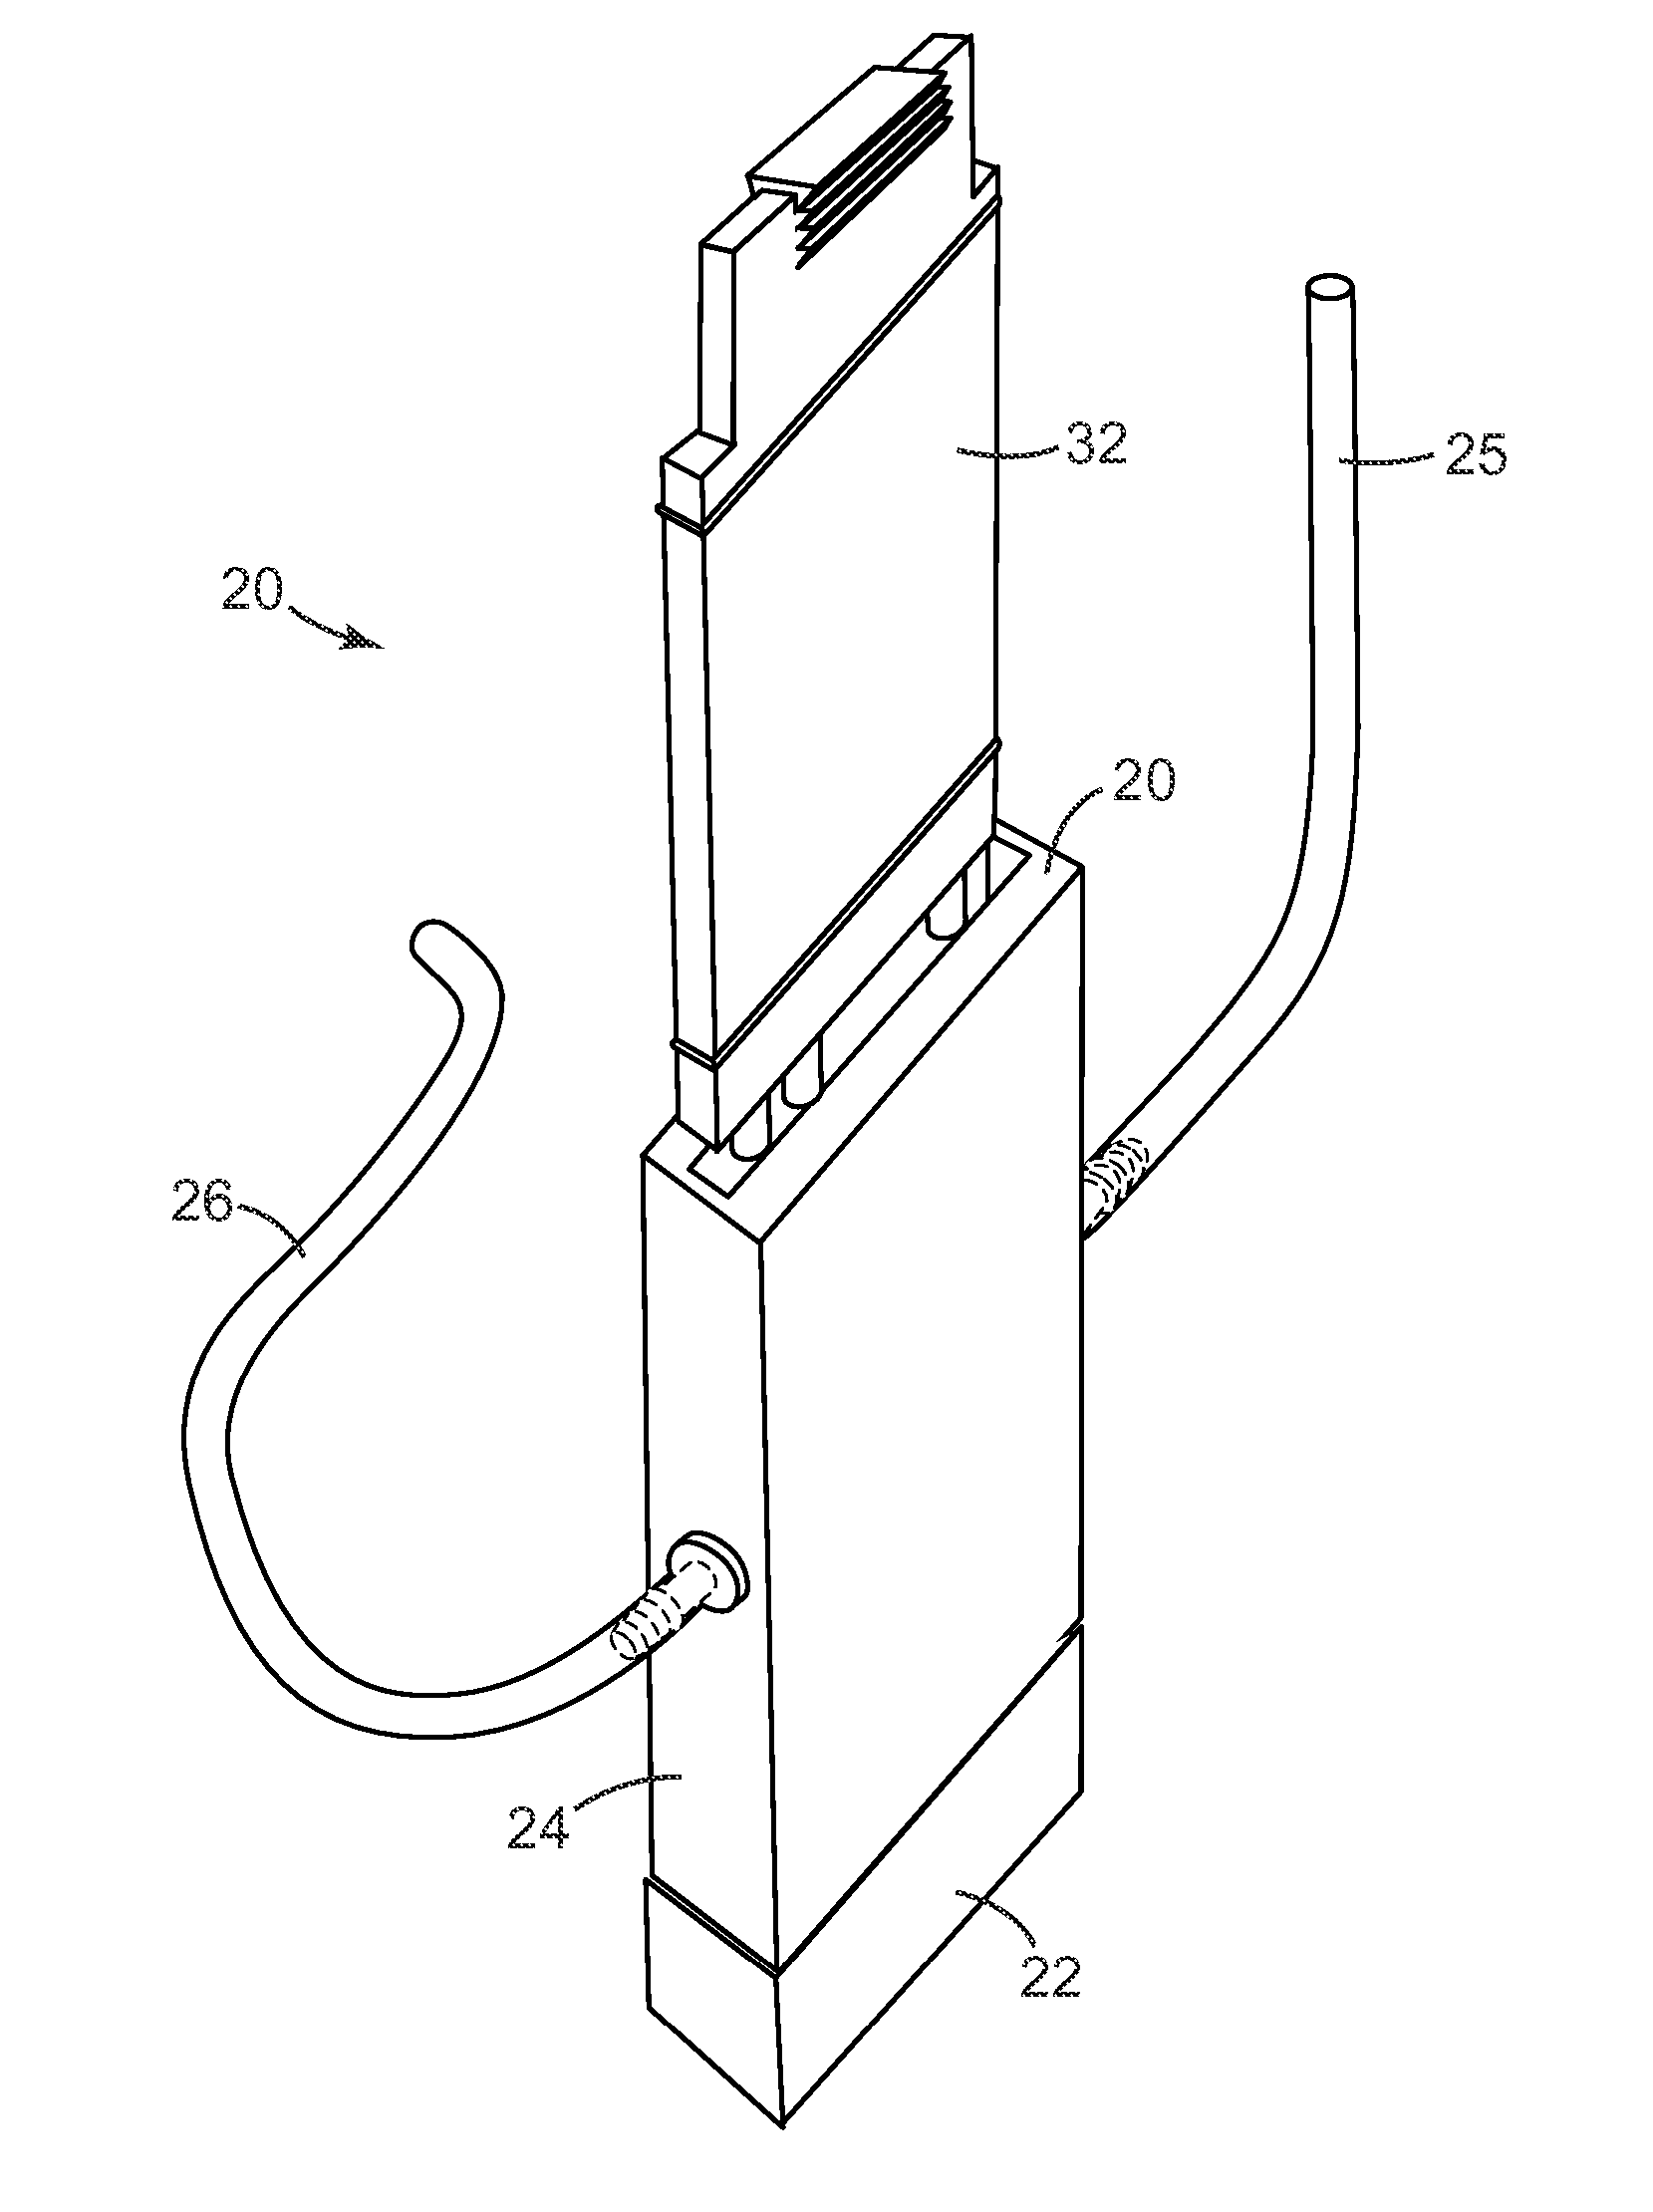 Systems and methods of dispensing individual servings of flavored and enhanced water